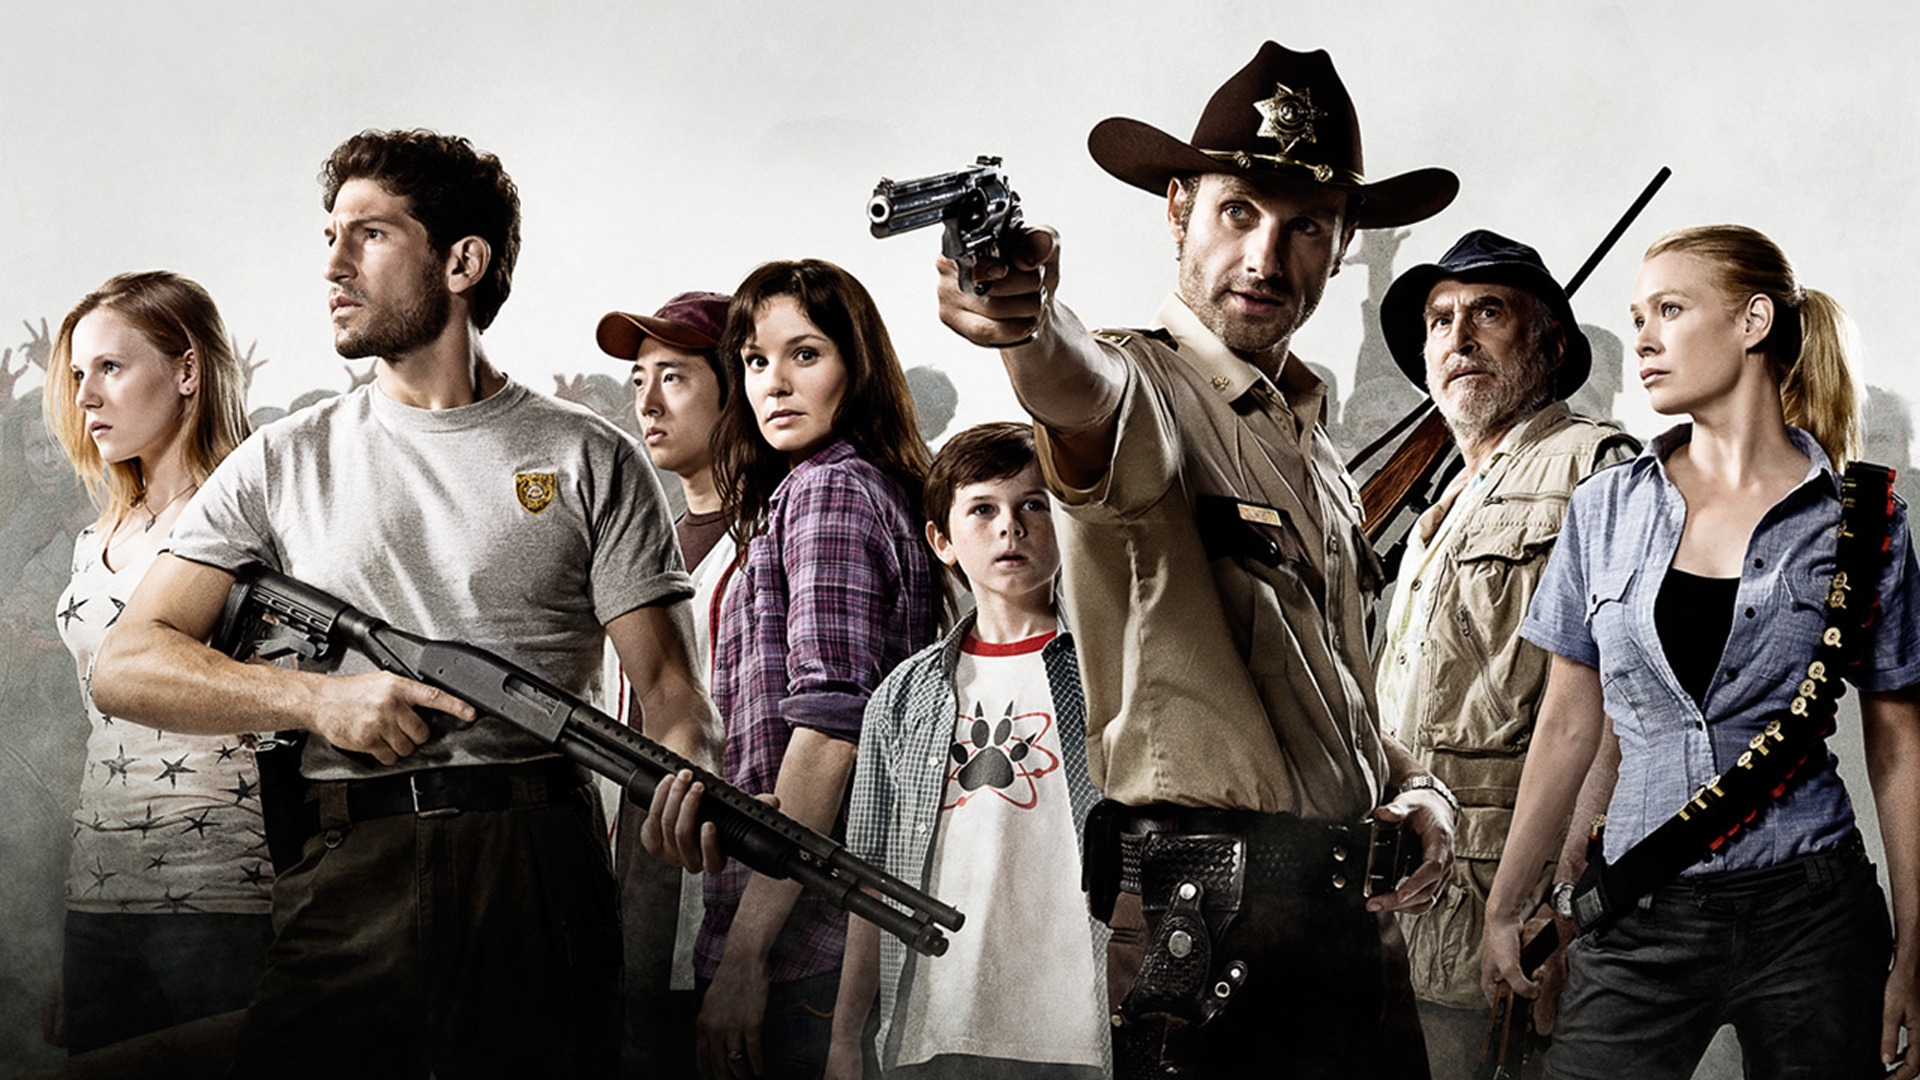 The Walking Dead Characters for 1920 x 1080 HDTV 1080p resolution